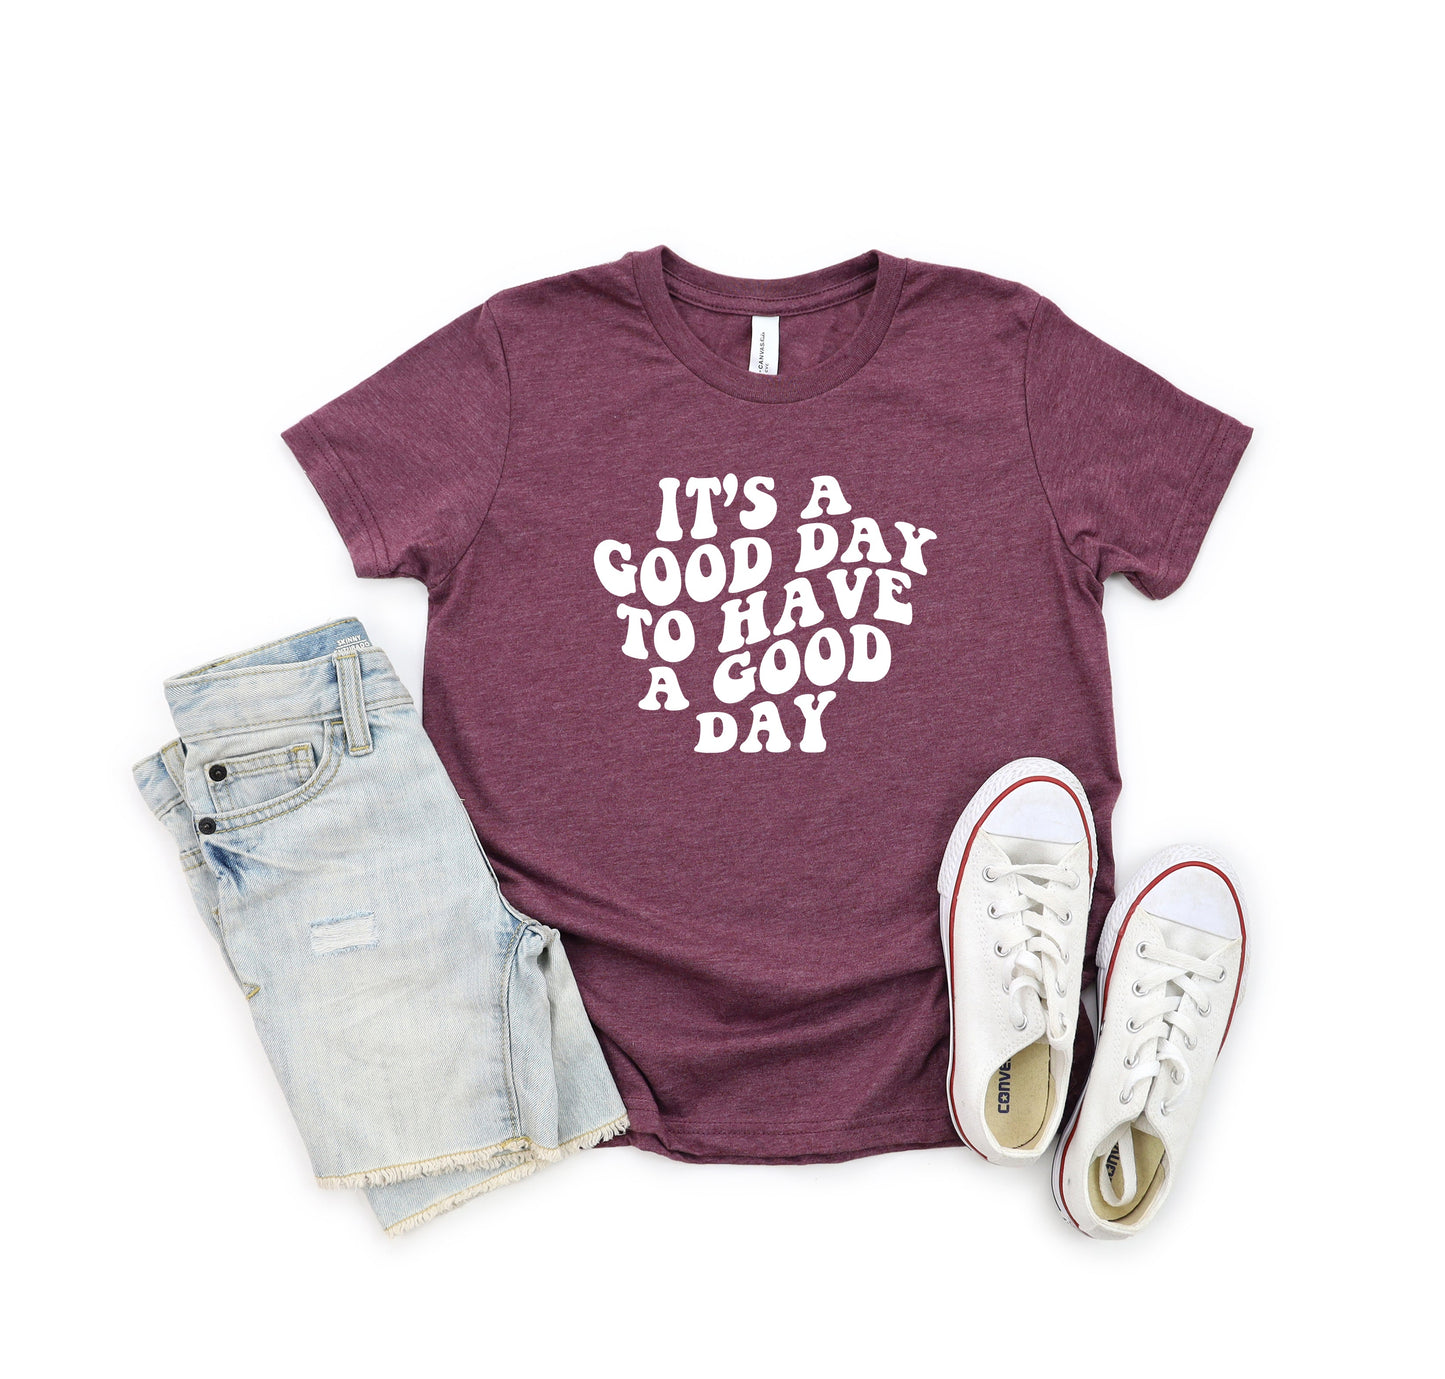 It's A Good Day To Have A Good Day | Youth Short Sleeve Crew Neck